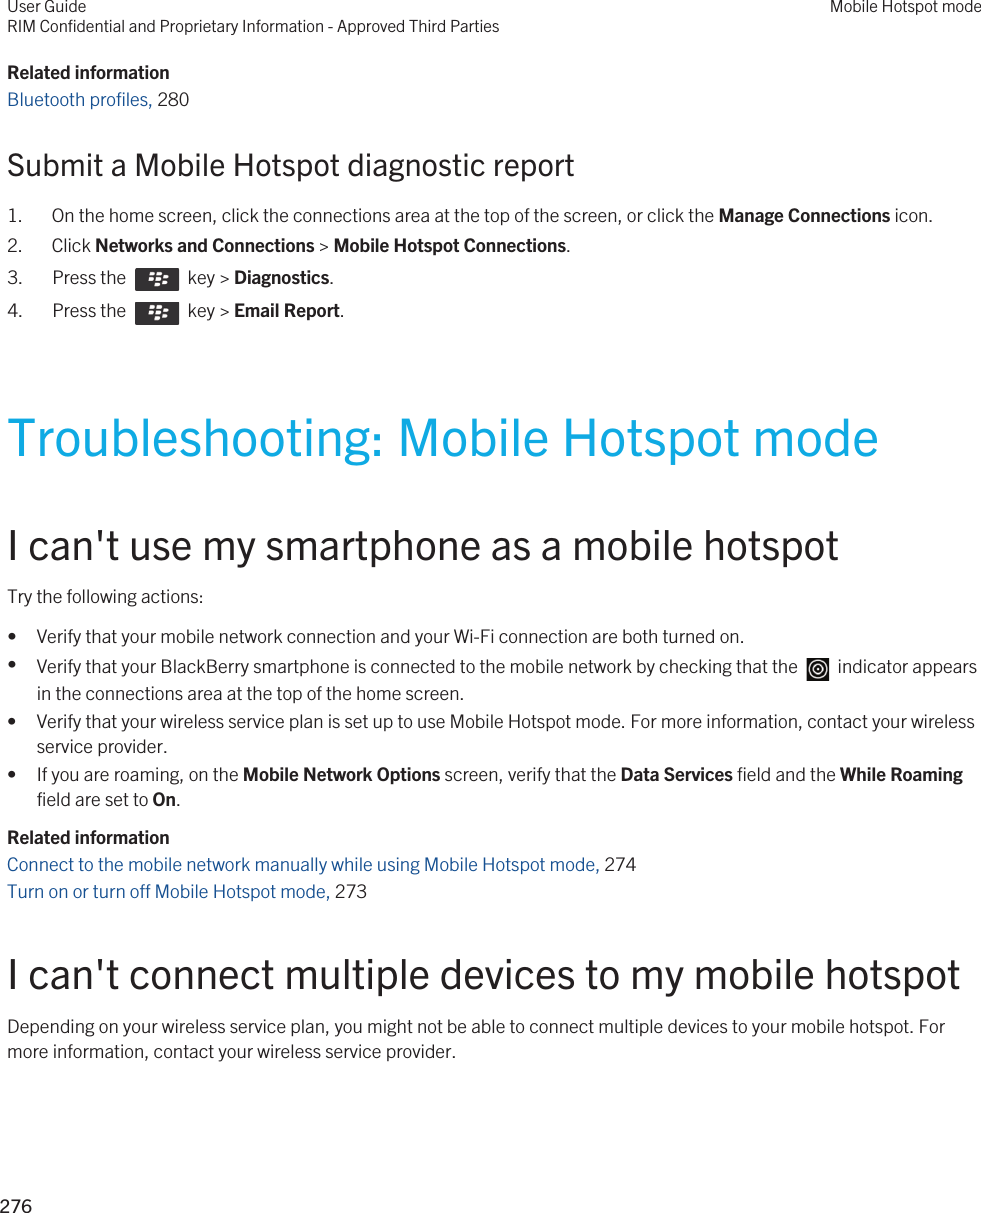 Related informationBluetooth profiles, 280Submit a Mobile Hotspot diagnostic report1. On the home screen, click the connections area at the top of the screen, or click the Manage Connections icon.2. Click Networks and Connections &gt; Mobile Hotspot Connections.3.  Press the    key &gt; Diagnostics.4.  Press the    key &gt; Email Report.Troubleshooting: Mobile Hotspot modeI can&apos;t use my smartphone as a mobile hotspotTry the following actions:• Verify that your mobile network connection and your Wi-Fi connection are both turned on.•Verify that your BlackBerry smartphone is connected to the mobile network by checking that the    indicator appears in the connections area at the top of the home screen.• Verify that your wireless service plan is set up to use Mobile Hotspot mode. For more information, contact your wireless service provider.• If you are roaming, on the Mobile Network Options screen, verify that the Data Services field and the While Roaming field are set to On.Related informationConnect to the mobile network manually while using Mobile Hotspot mode, 274 Turn on or turn off Mobile Hotspot mode, 273 I can&apos;t connect multiple devices to my mobile hotspotDepending on your wireless service plan, you might not be able to connect multiple devices to your mobile hotspot. For more information, contact your wireless service provider.User GuideRIM Confidential and Proprietary Information - Approved Third PartiesMobile Hotspot mode276 